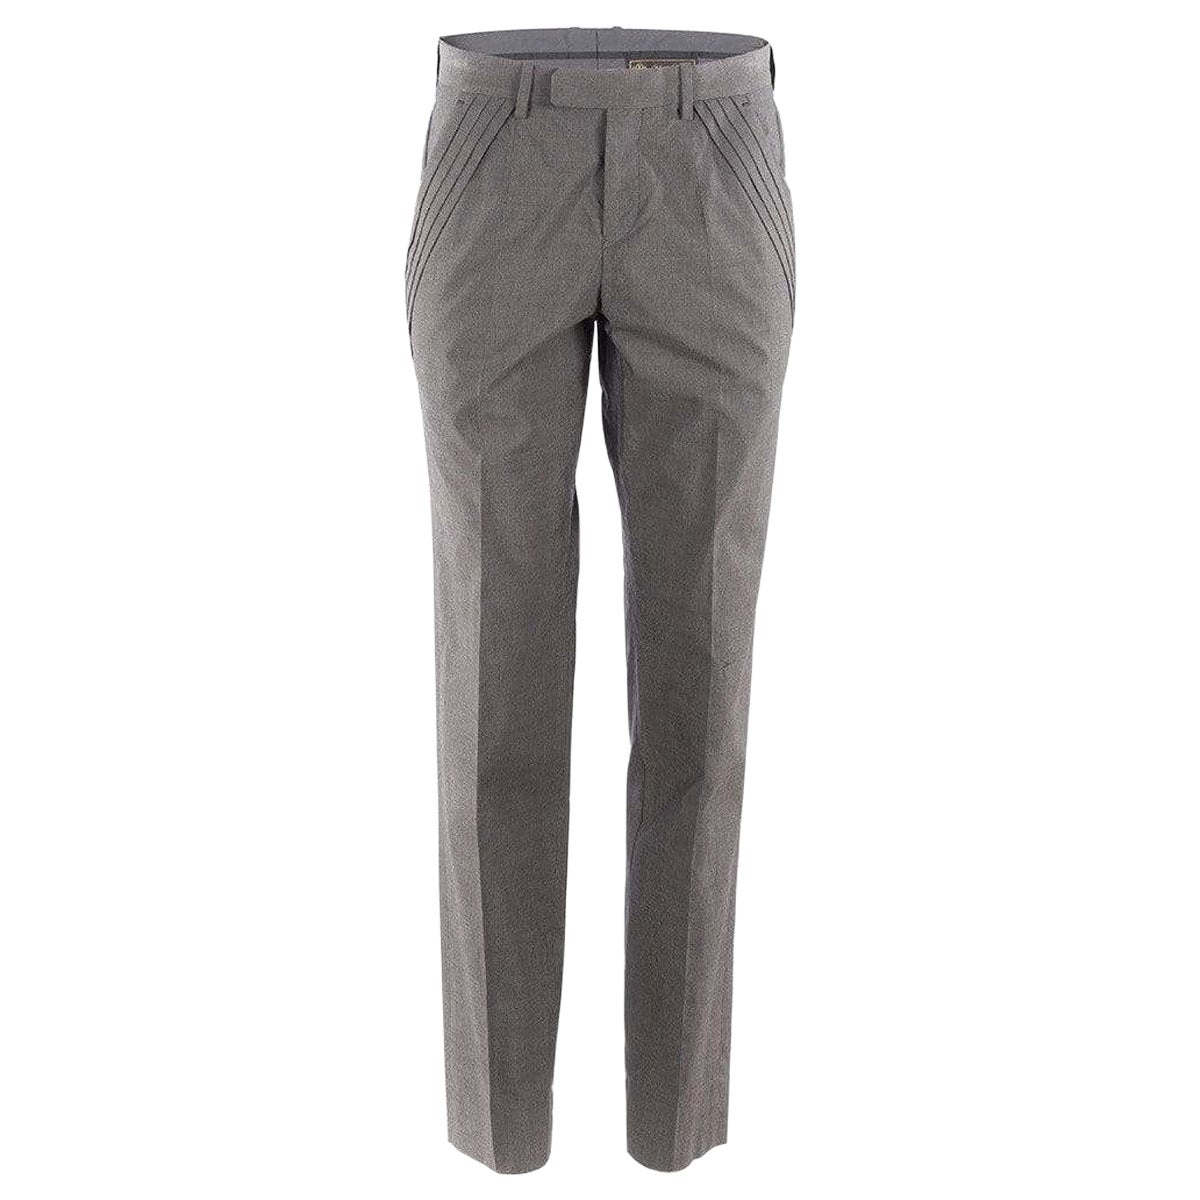 Undercover Grey Pleated Trouser  